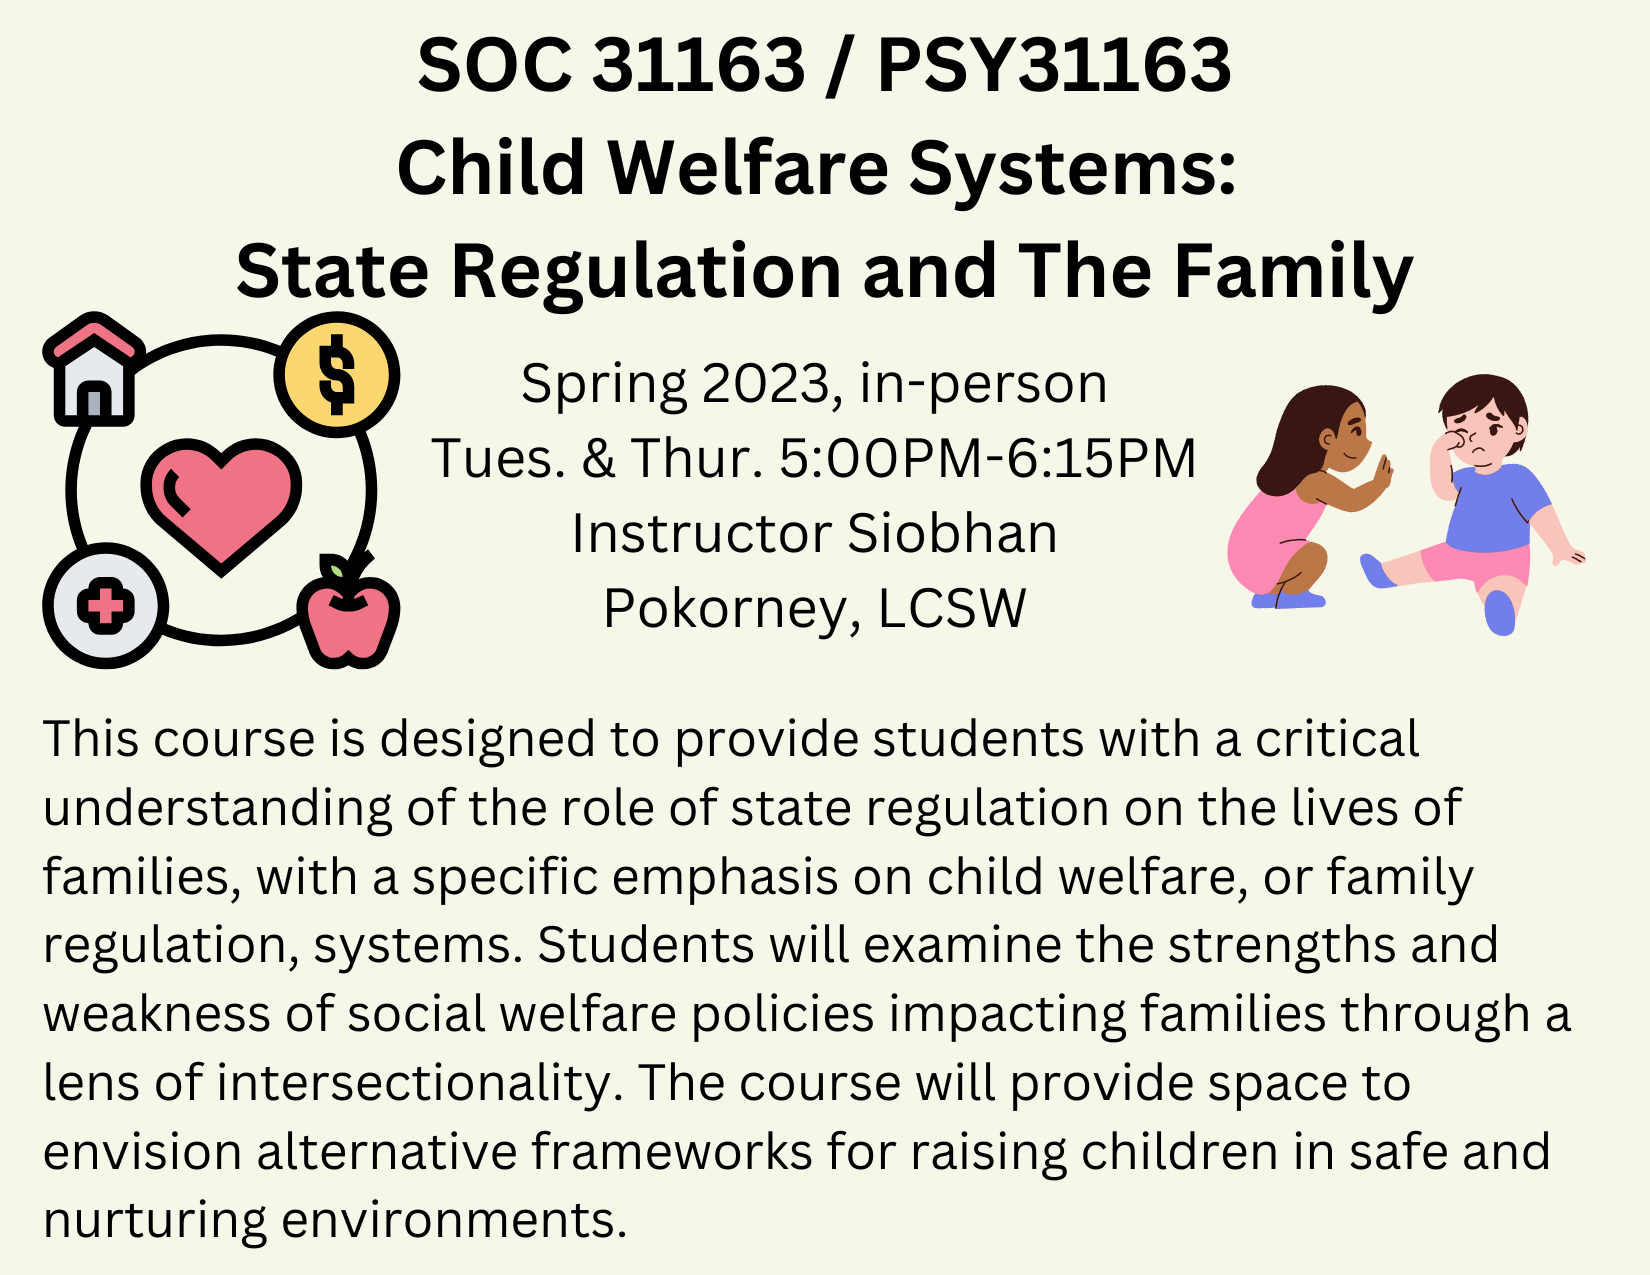 Child Welfare Systems: State Regulation and The Family Course Spring 2023